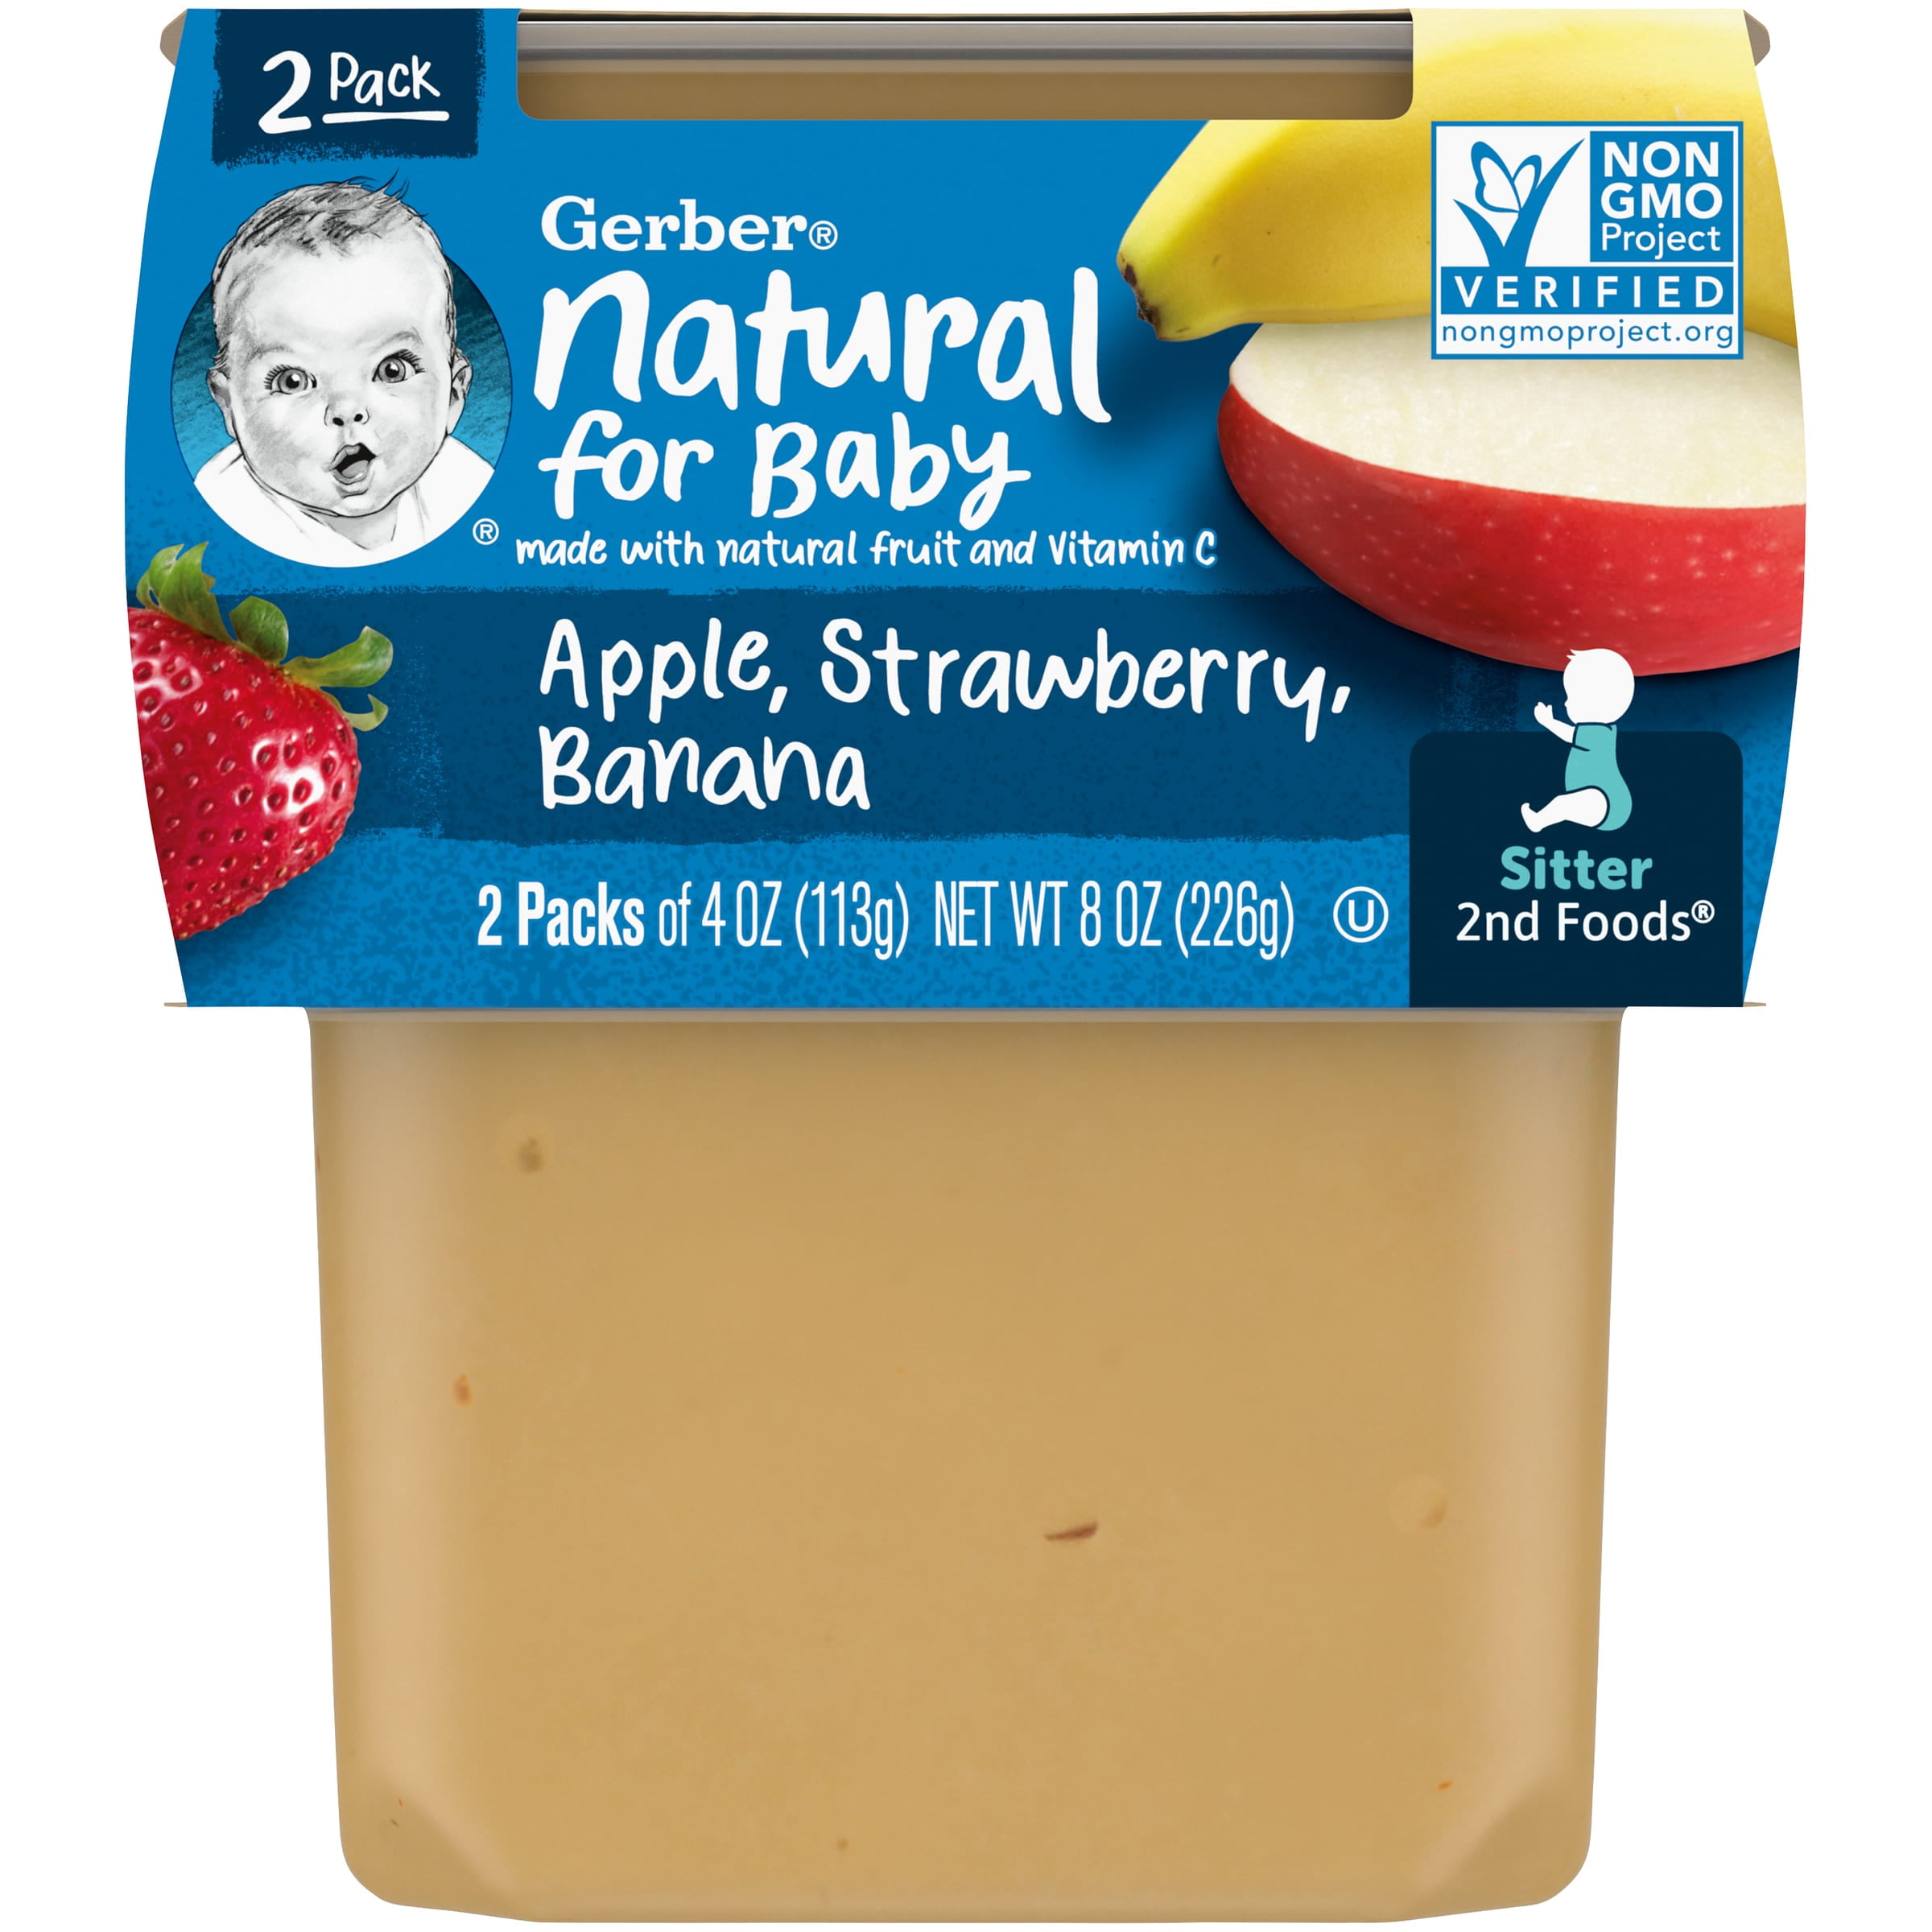 Gerber 2nd Foods Natural for Baby Baby Food, Apple Strawberry Banana, 4 oz Tubs (2 Pack)